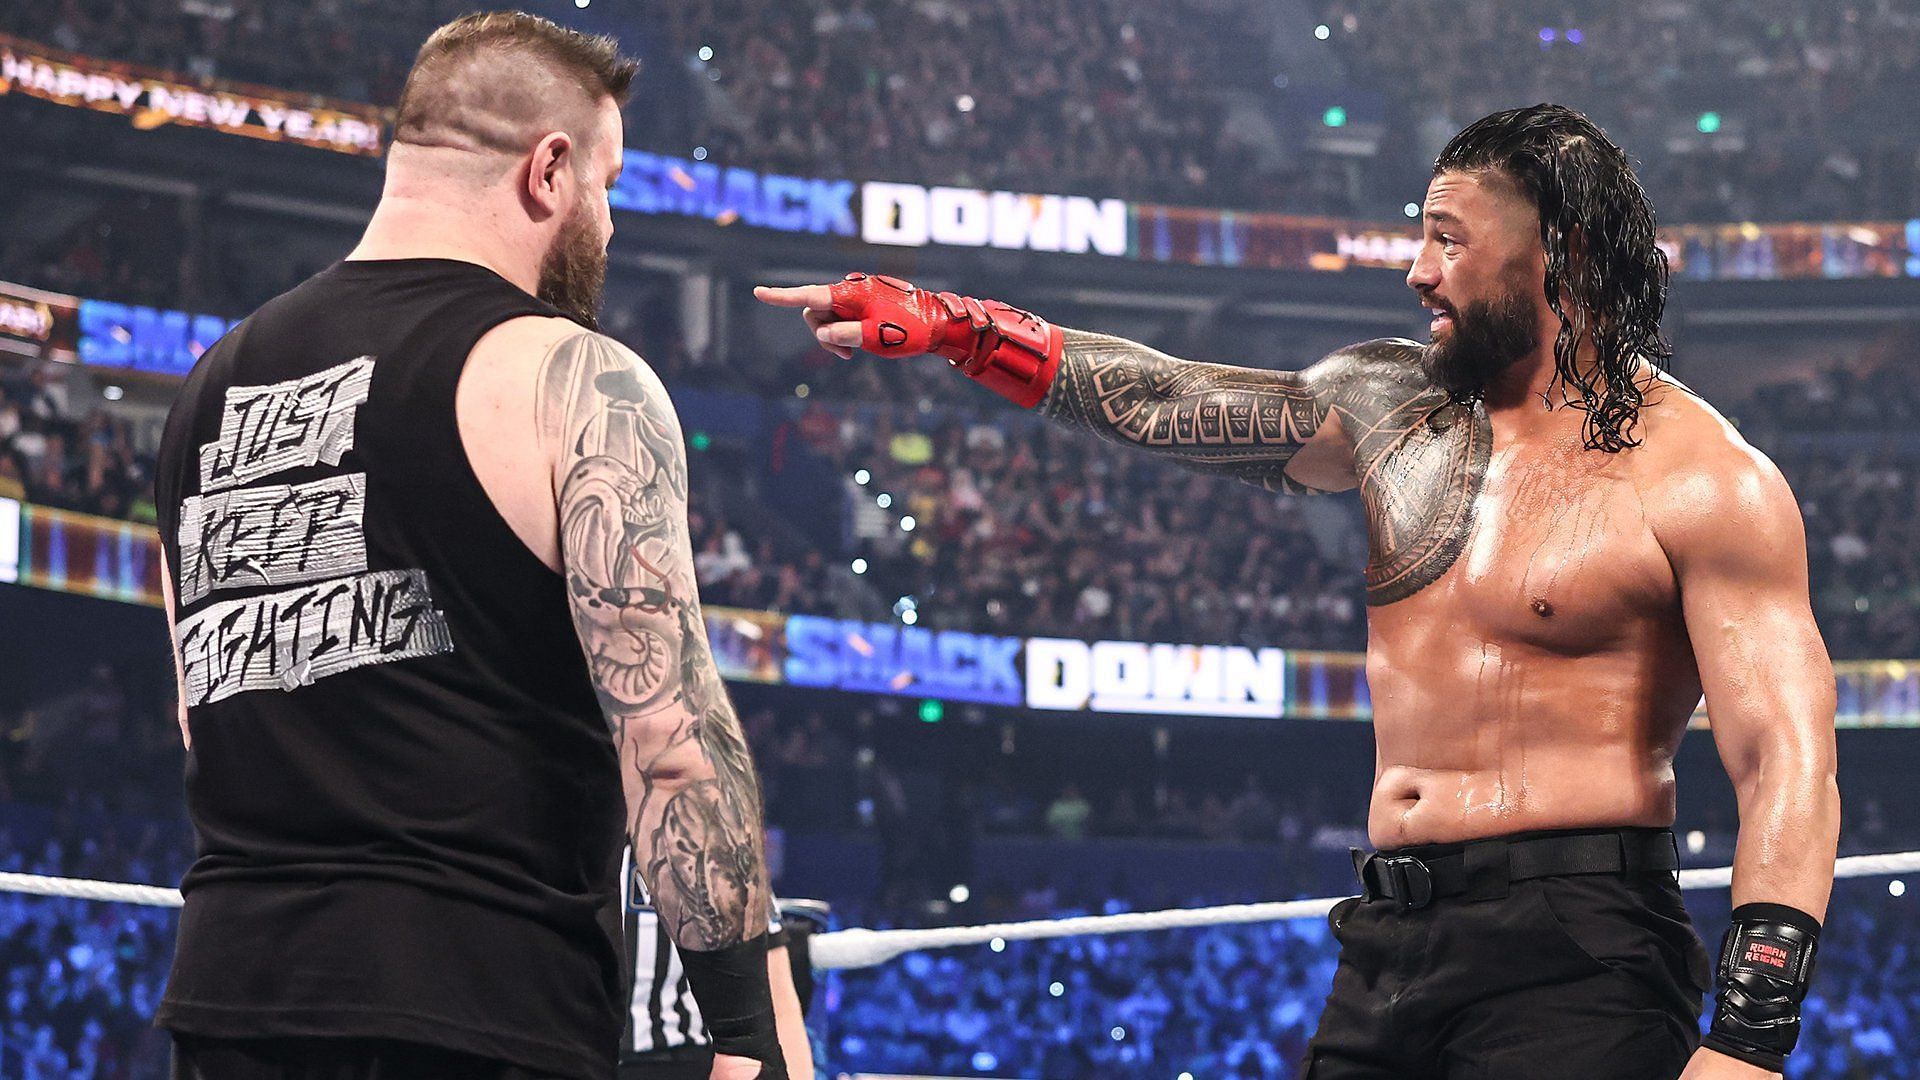 Kevin Owens and Roman Reigns will fight at the Royal Rumble this year